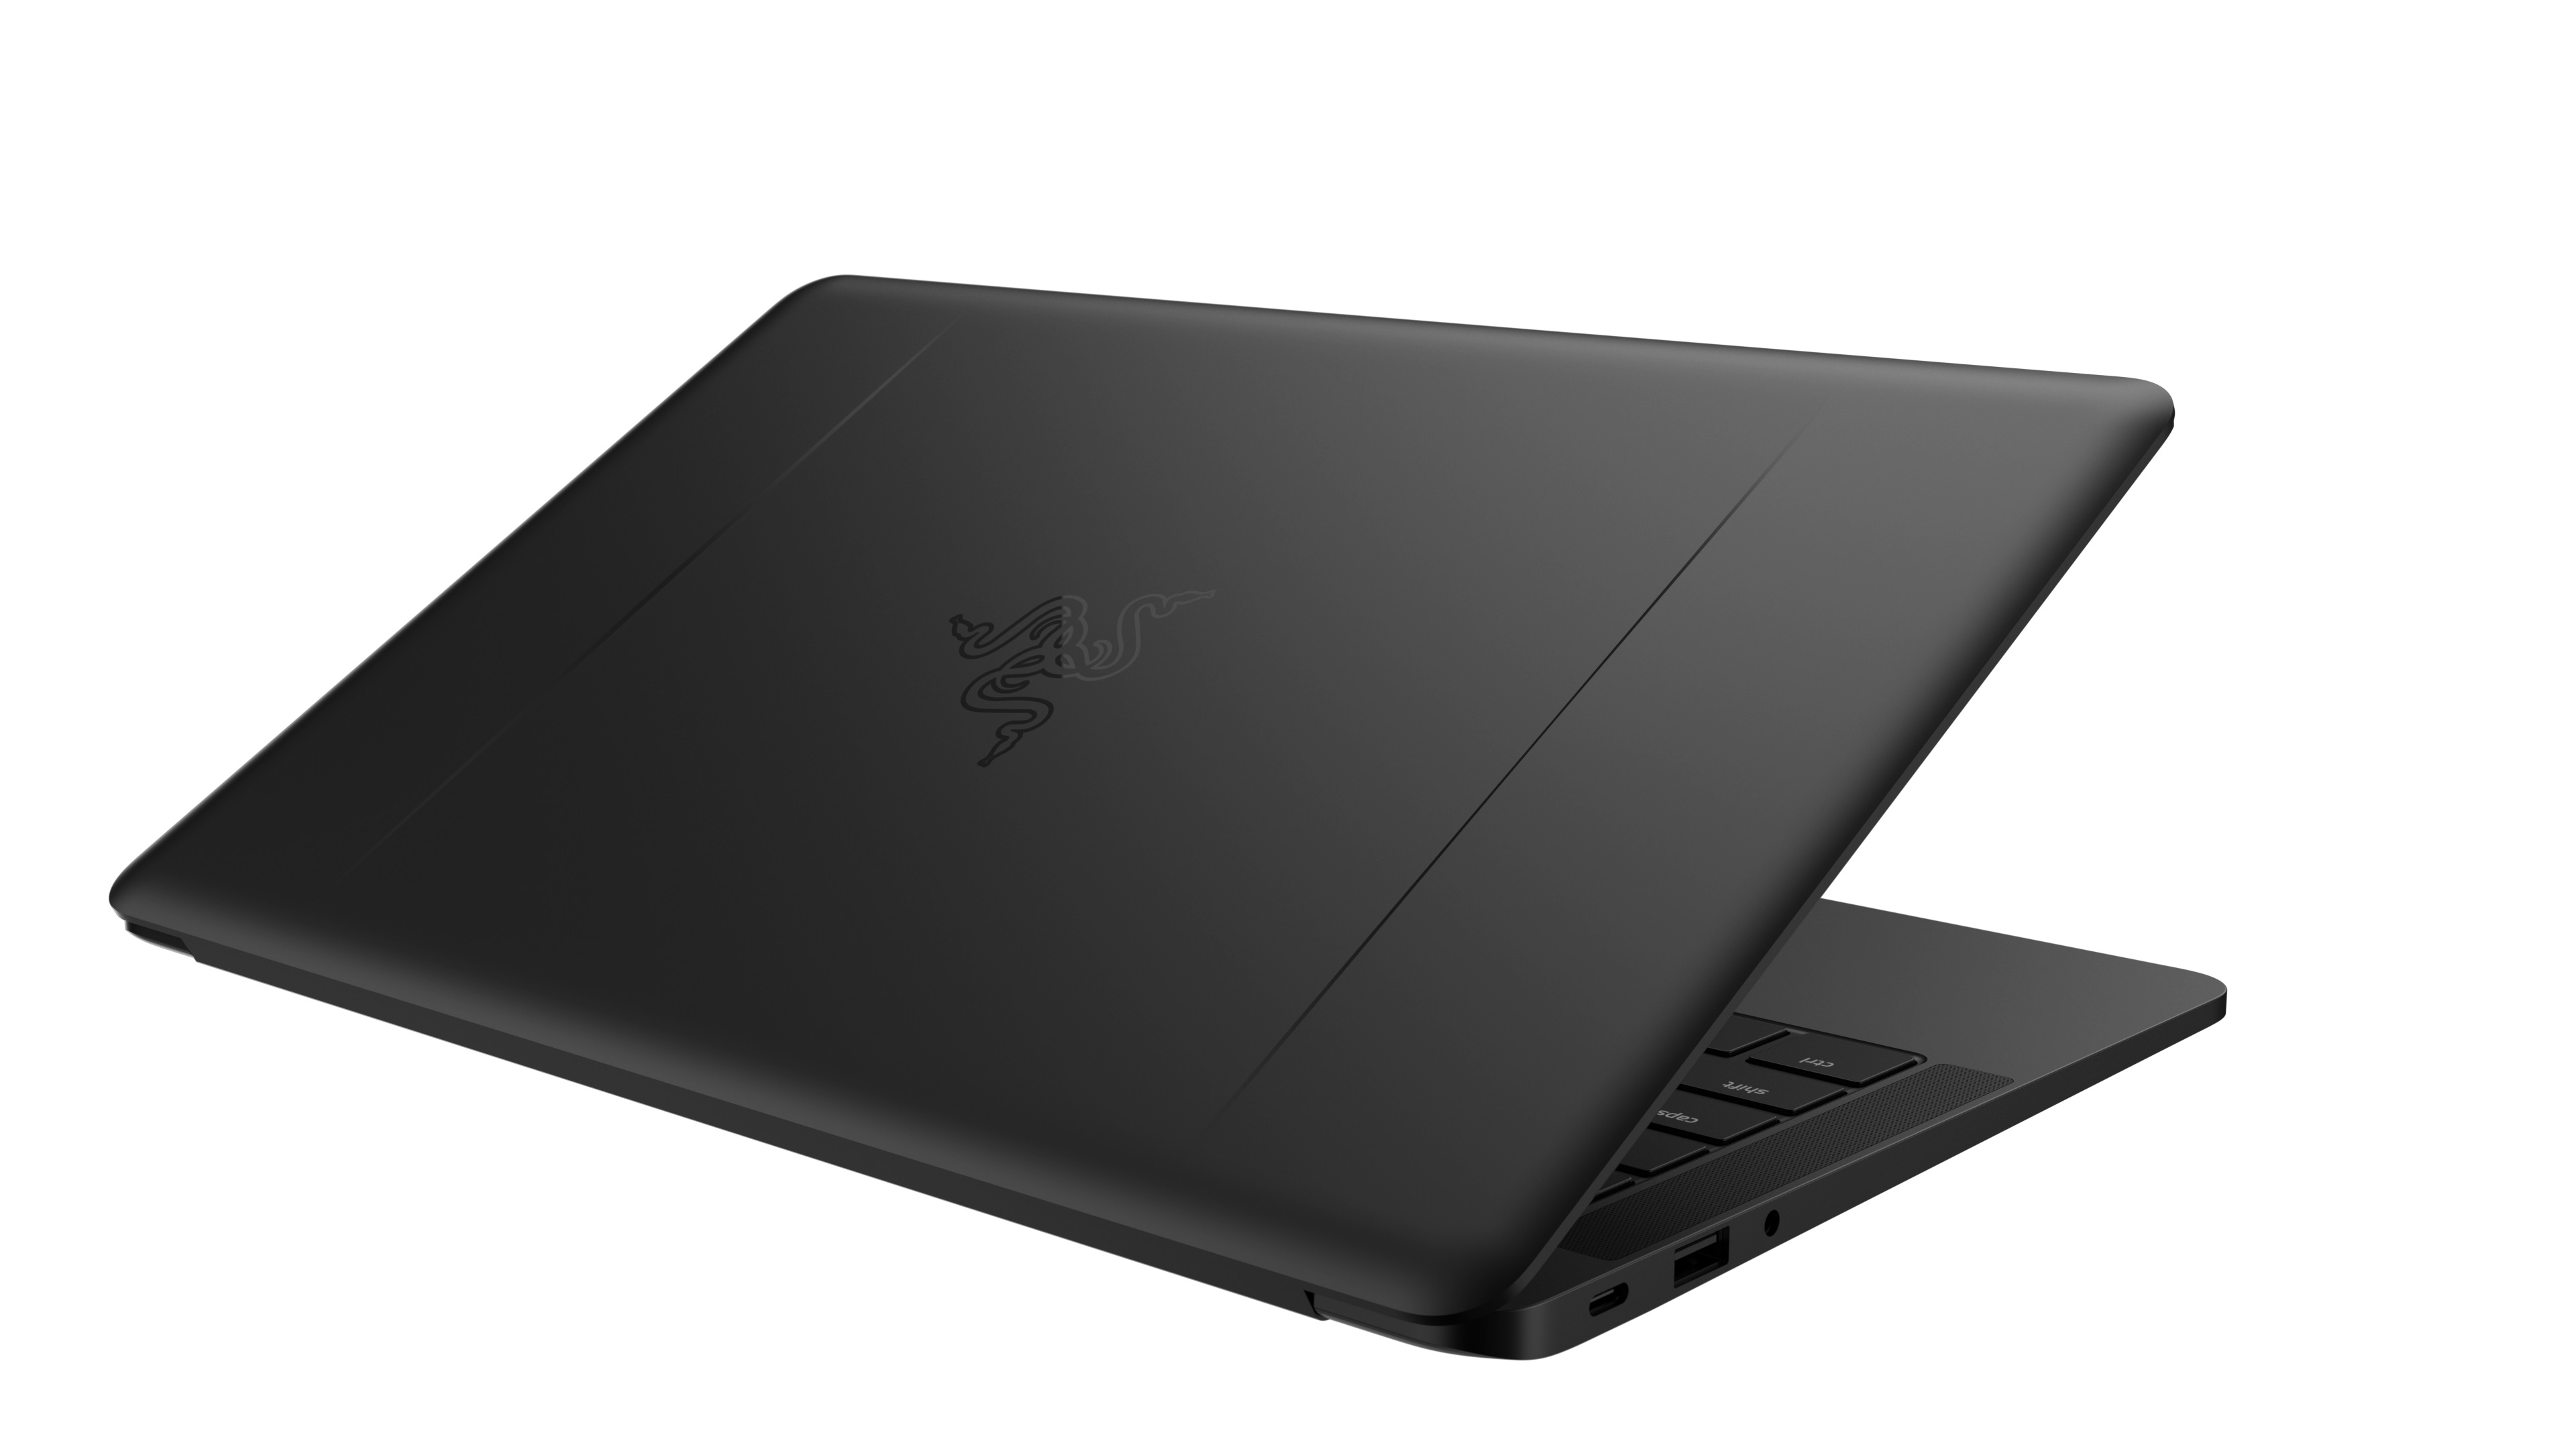 Razer announced its upgraded 13.3-inch version of the 12.5-inch Razer Blade Stealth with Windows 10